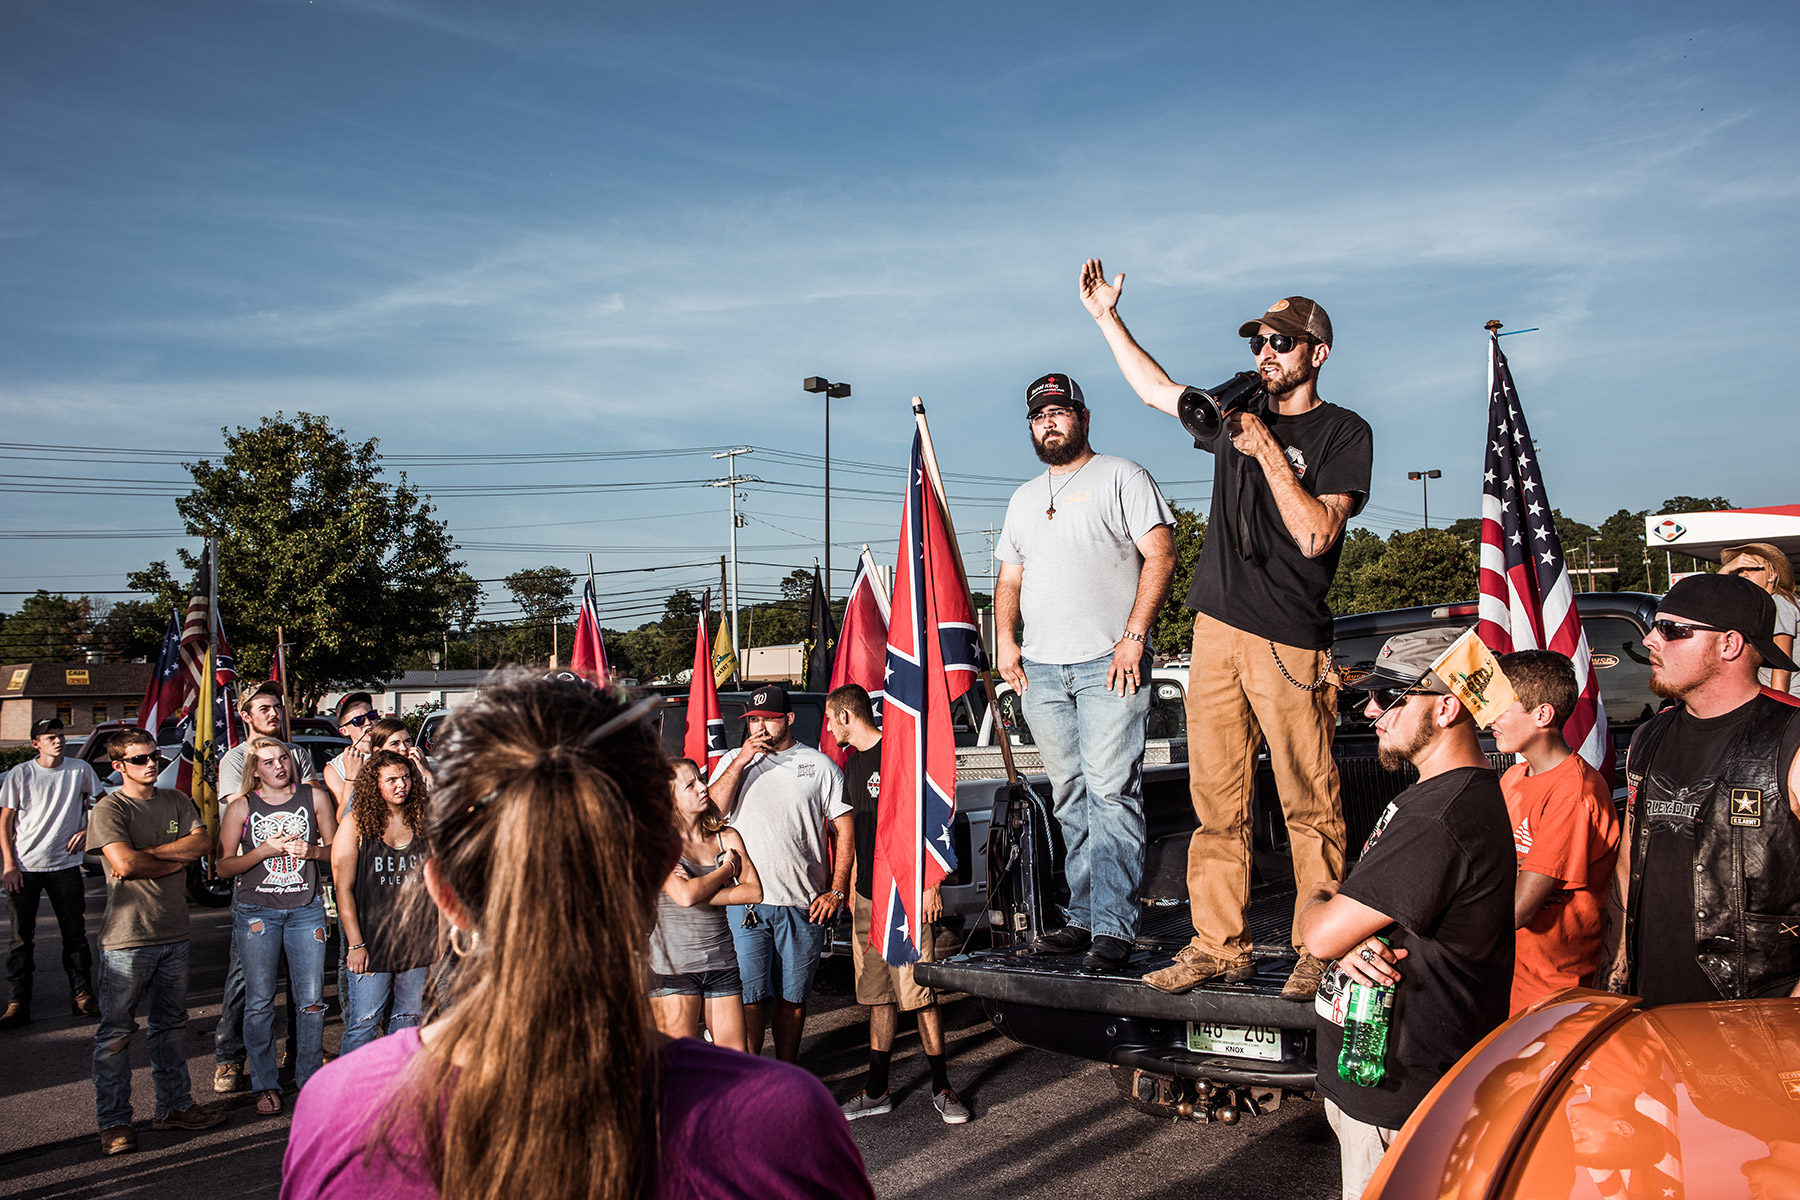 Tom Piece, right and Mathew Heimbach, tailgate left, deliver speeches during a confederate flag rally held in a parking lot in Seymour, Tennessee on Thursday, July 17, 2015. After rallying the crowd with talk of their heritage being under attach from the federal government, the two prompted the group to drive with flags raised through Knoxville. Mike Belleme for Al Jazeera America